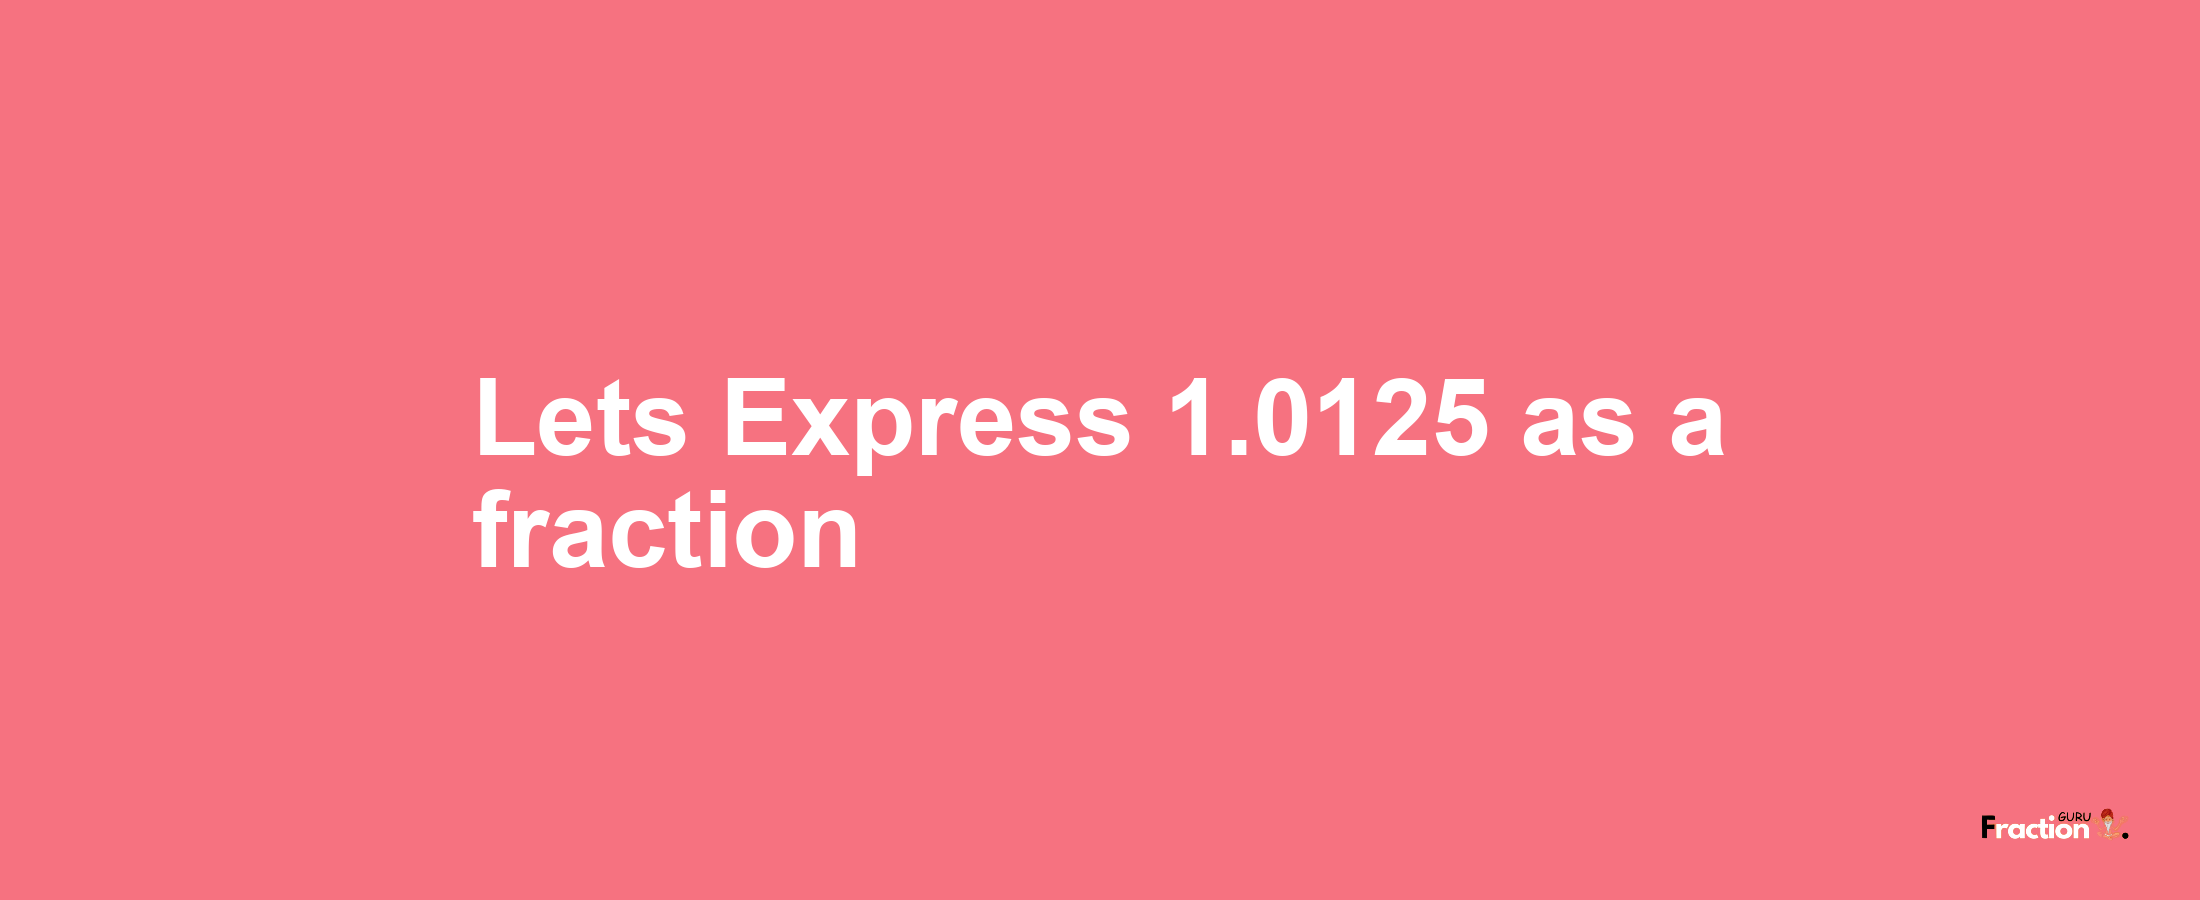 Lets Express 1.0125 as afraction